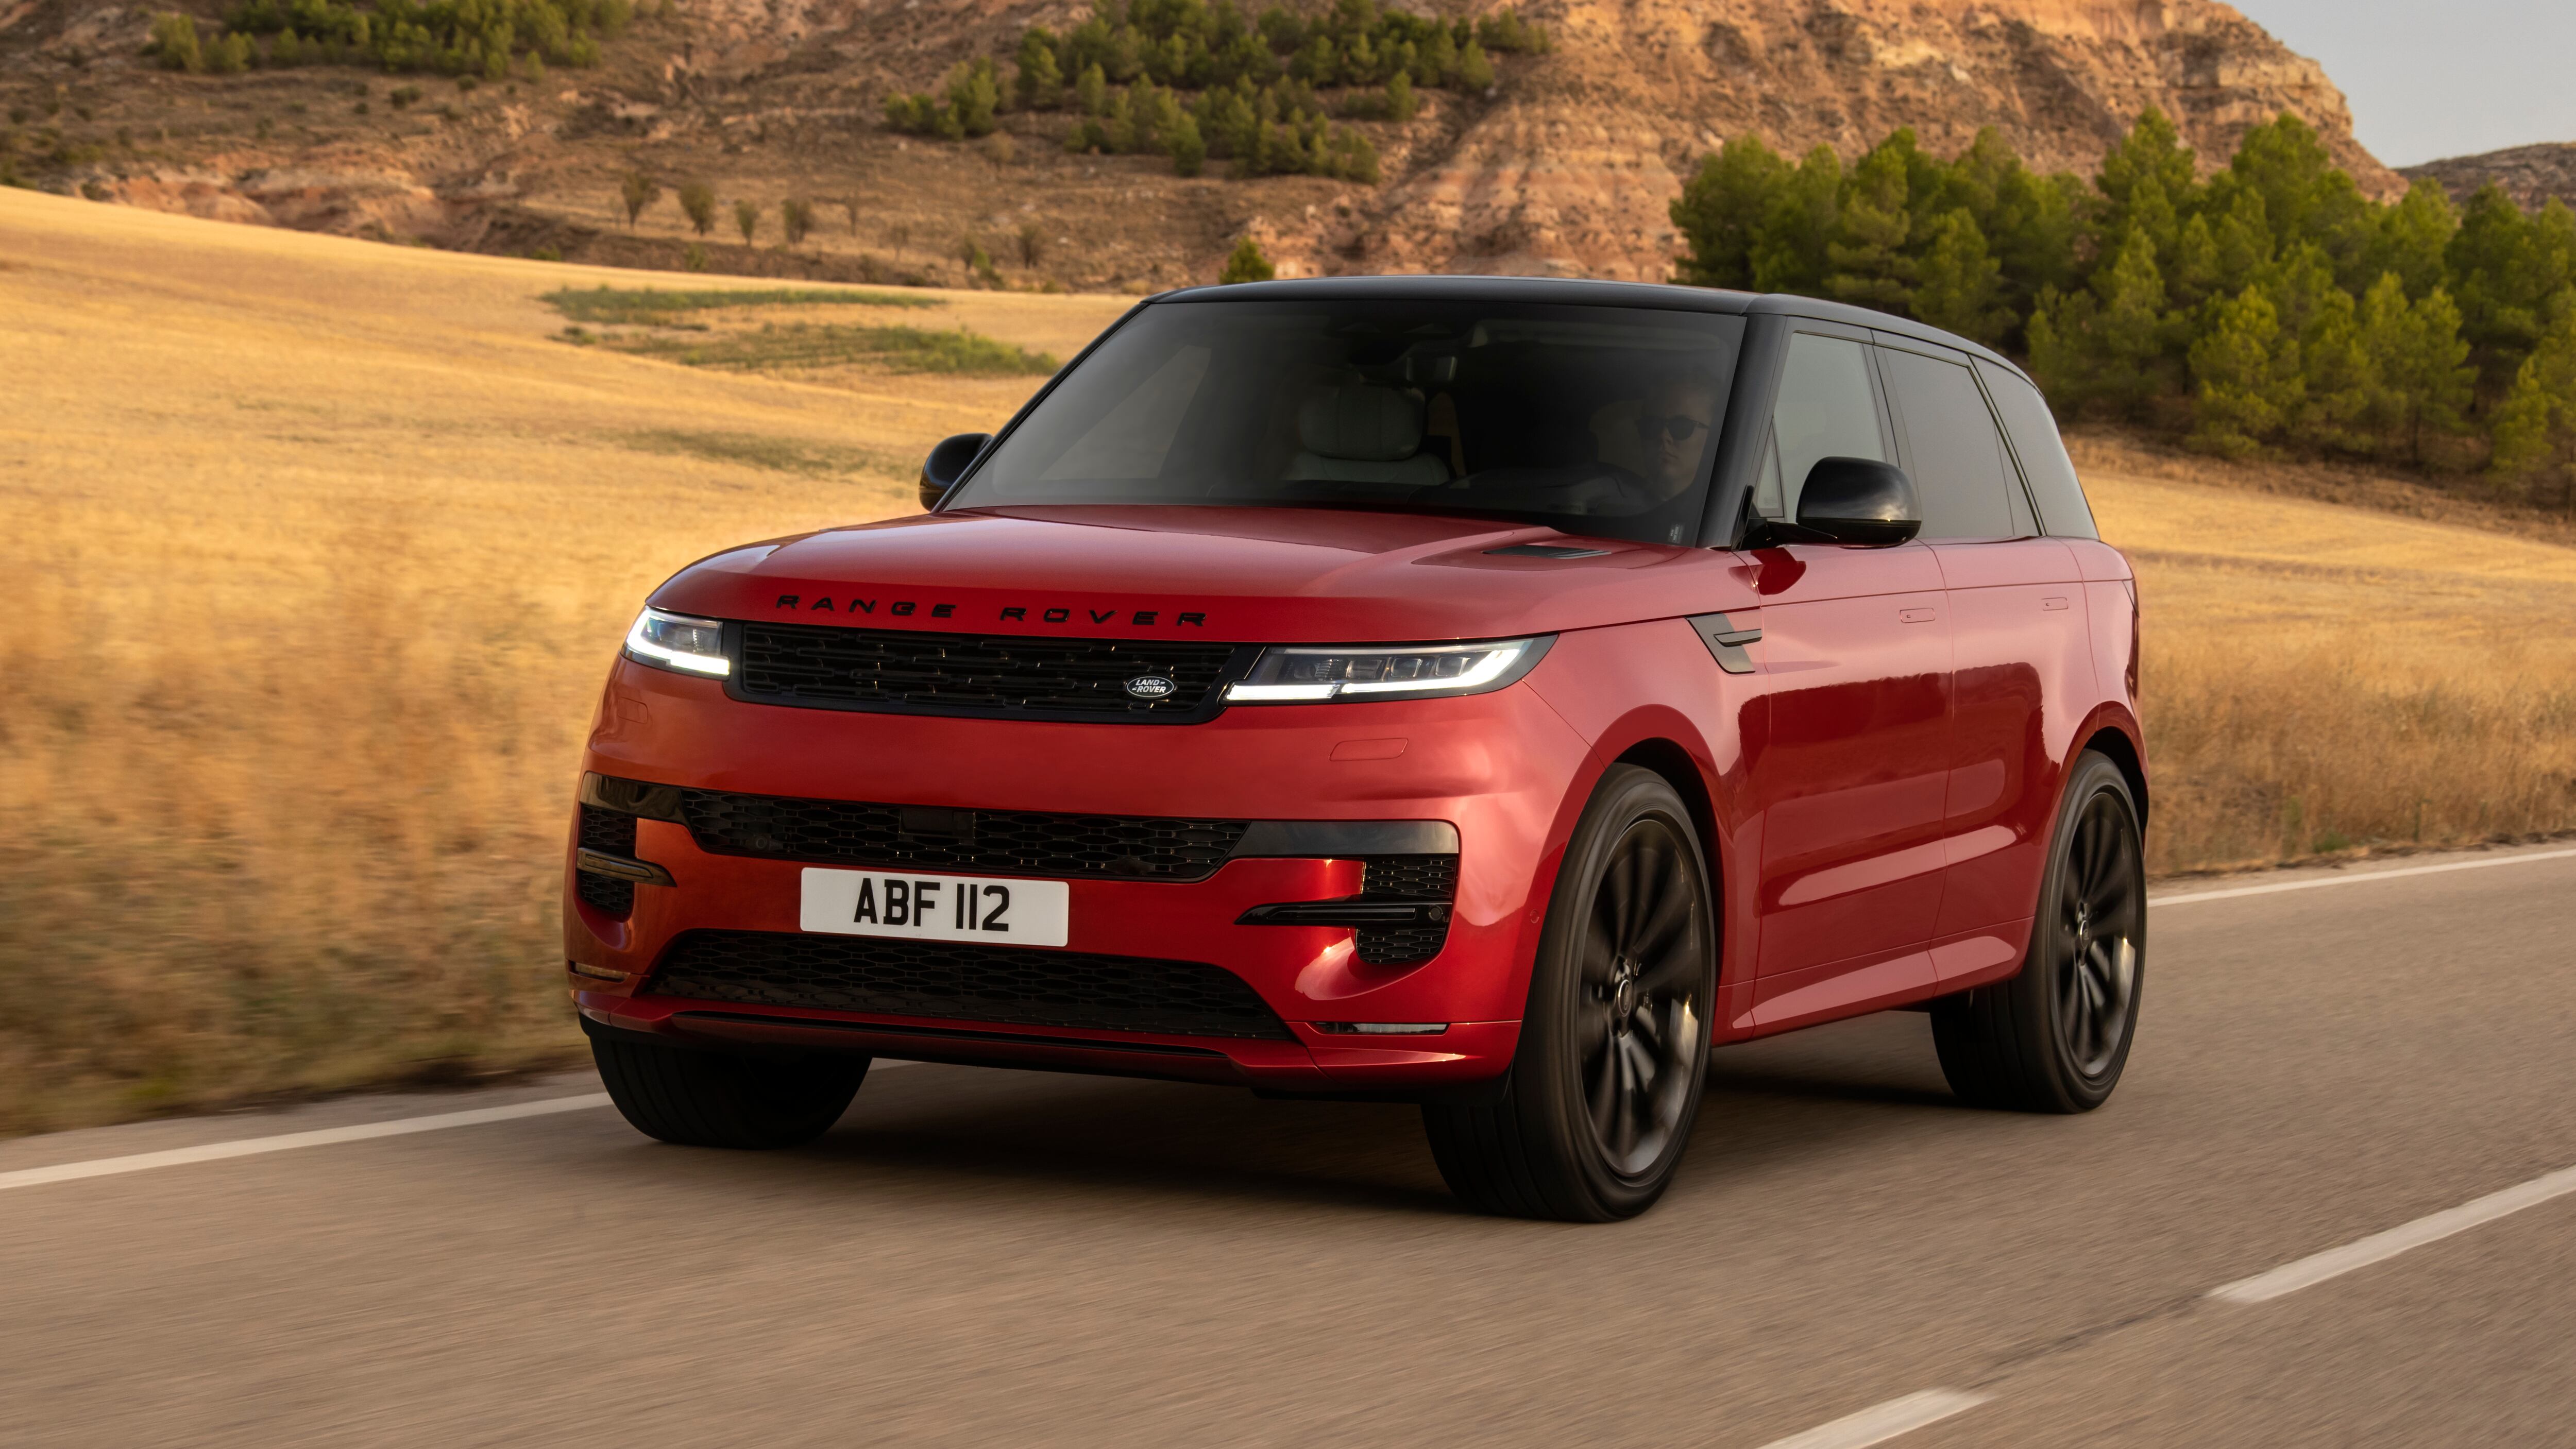 Jaguar Land Rover (JLR) has achieved its highest ever yearly sales